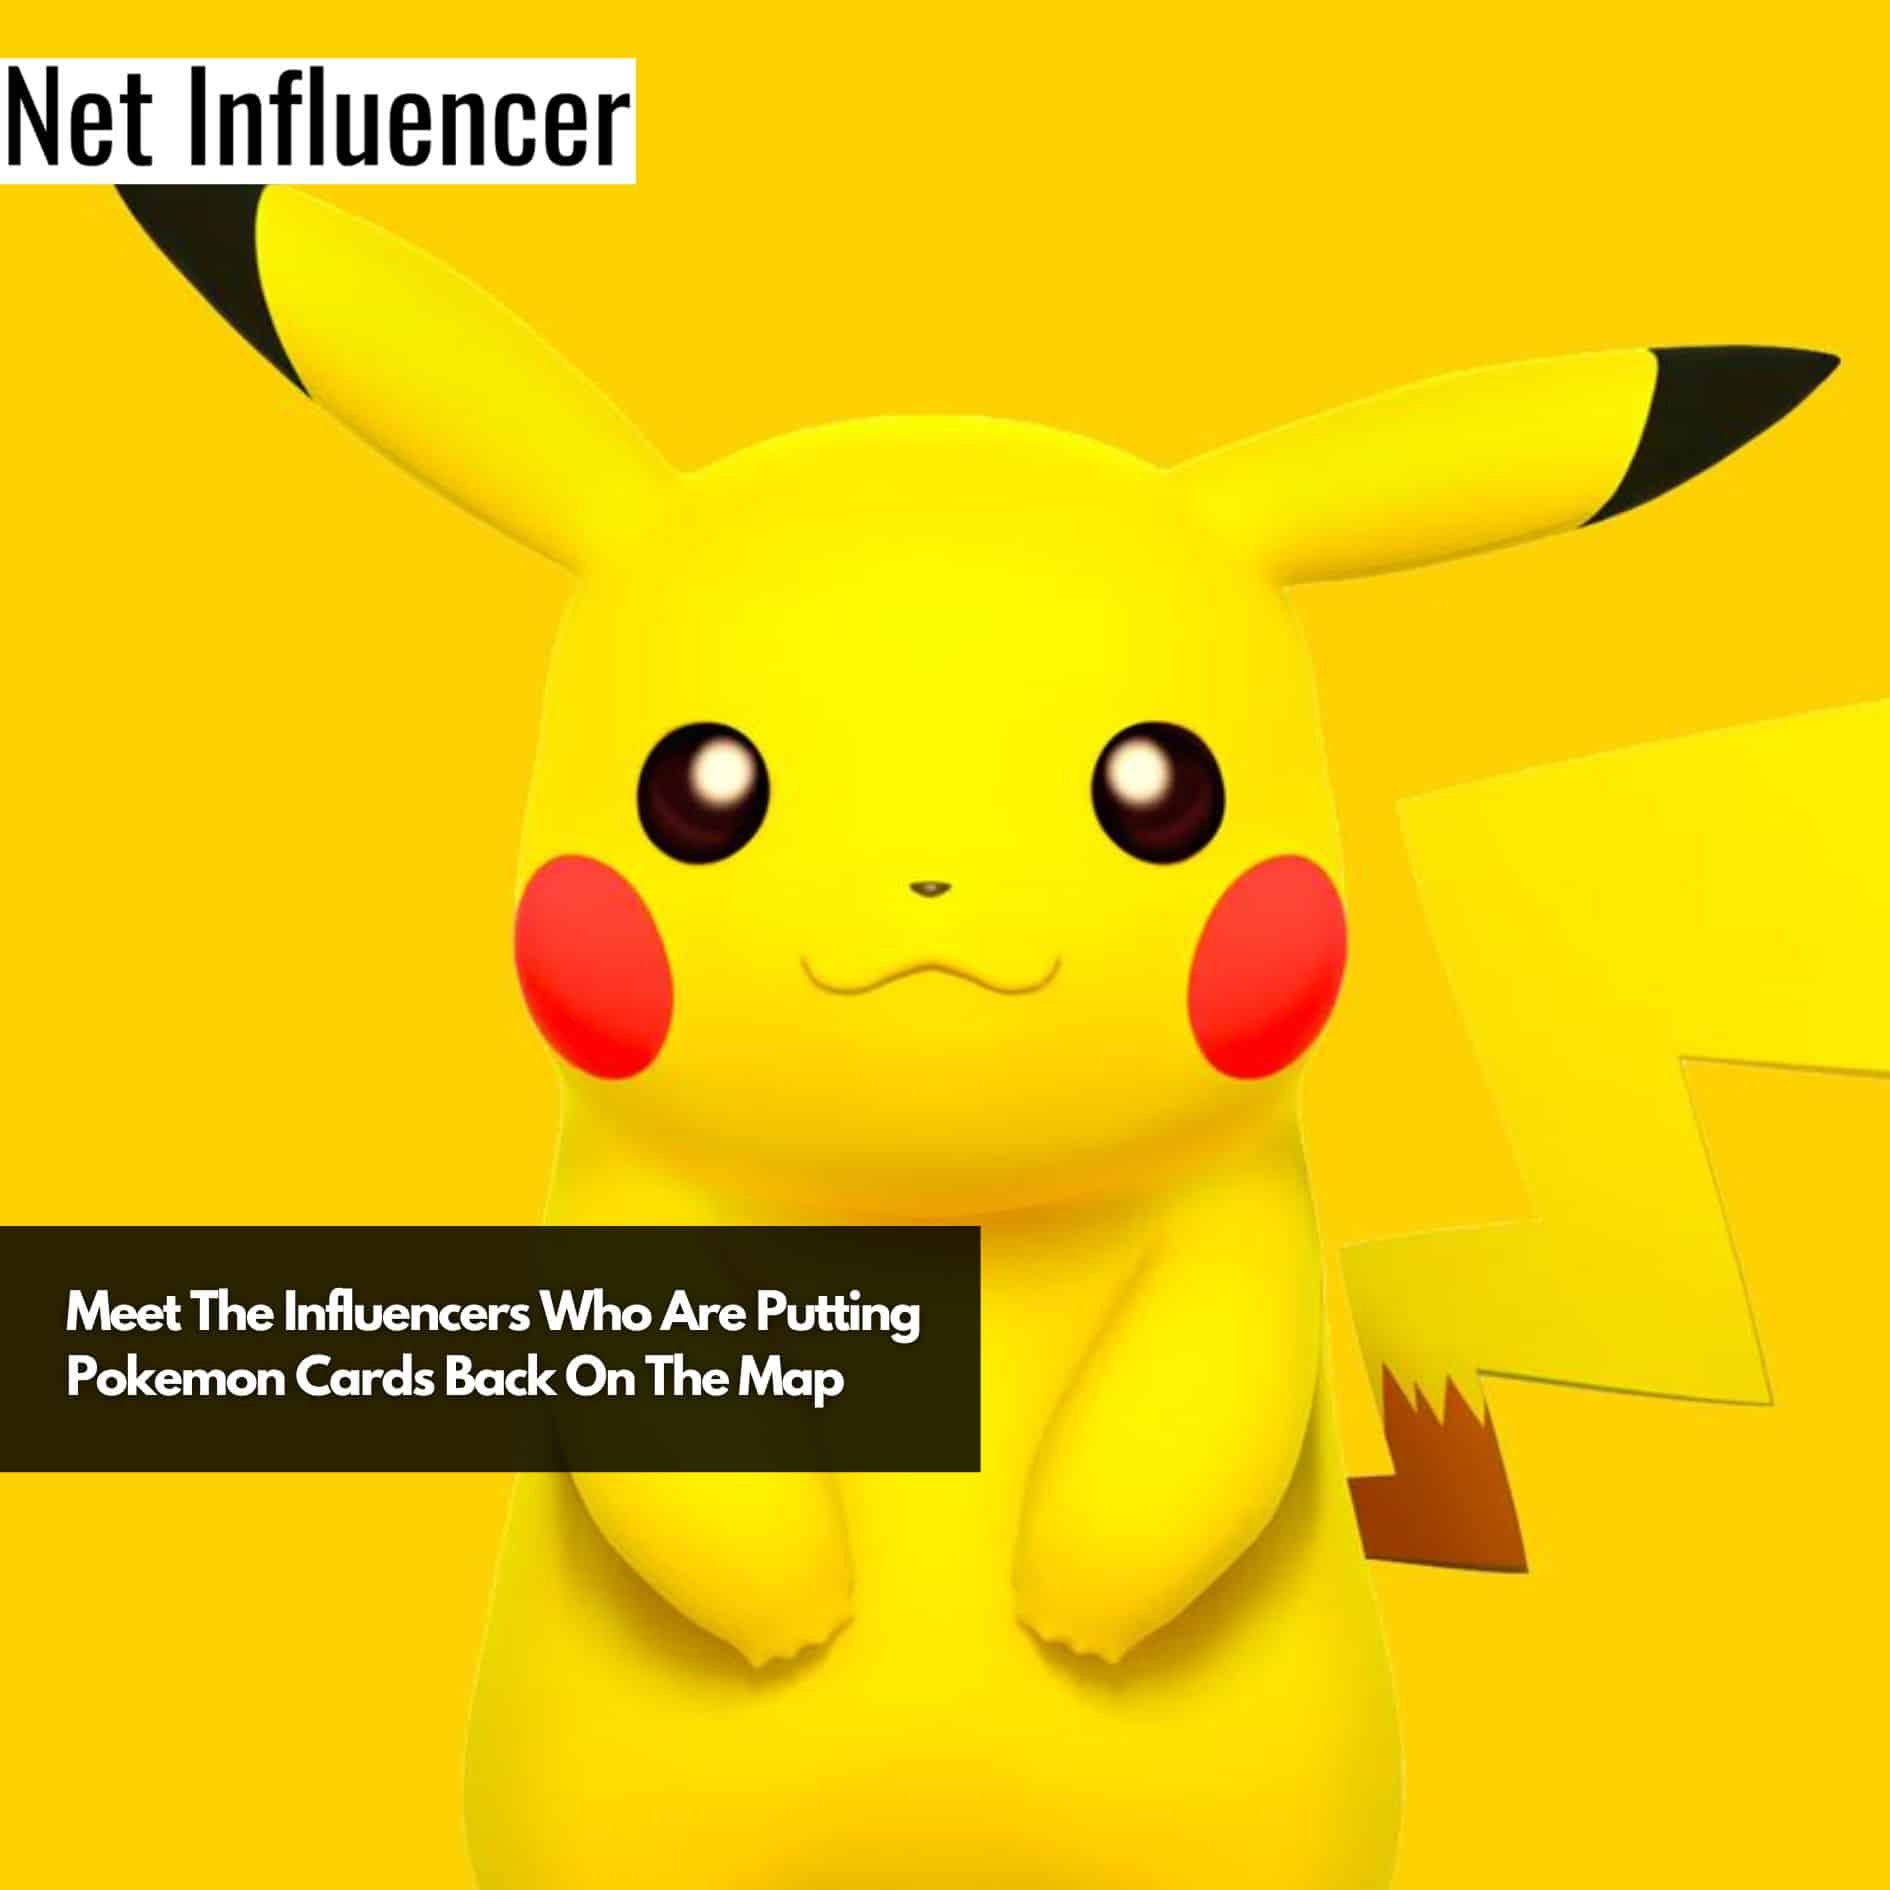 Meet The Influencers Who Are Putting Pokemon Cards Back On The Map